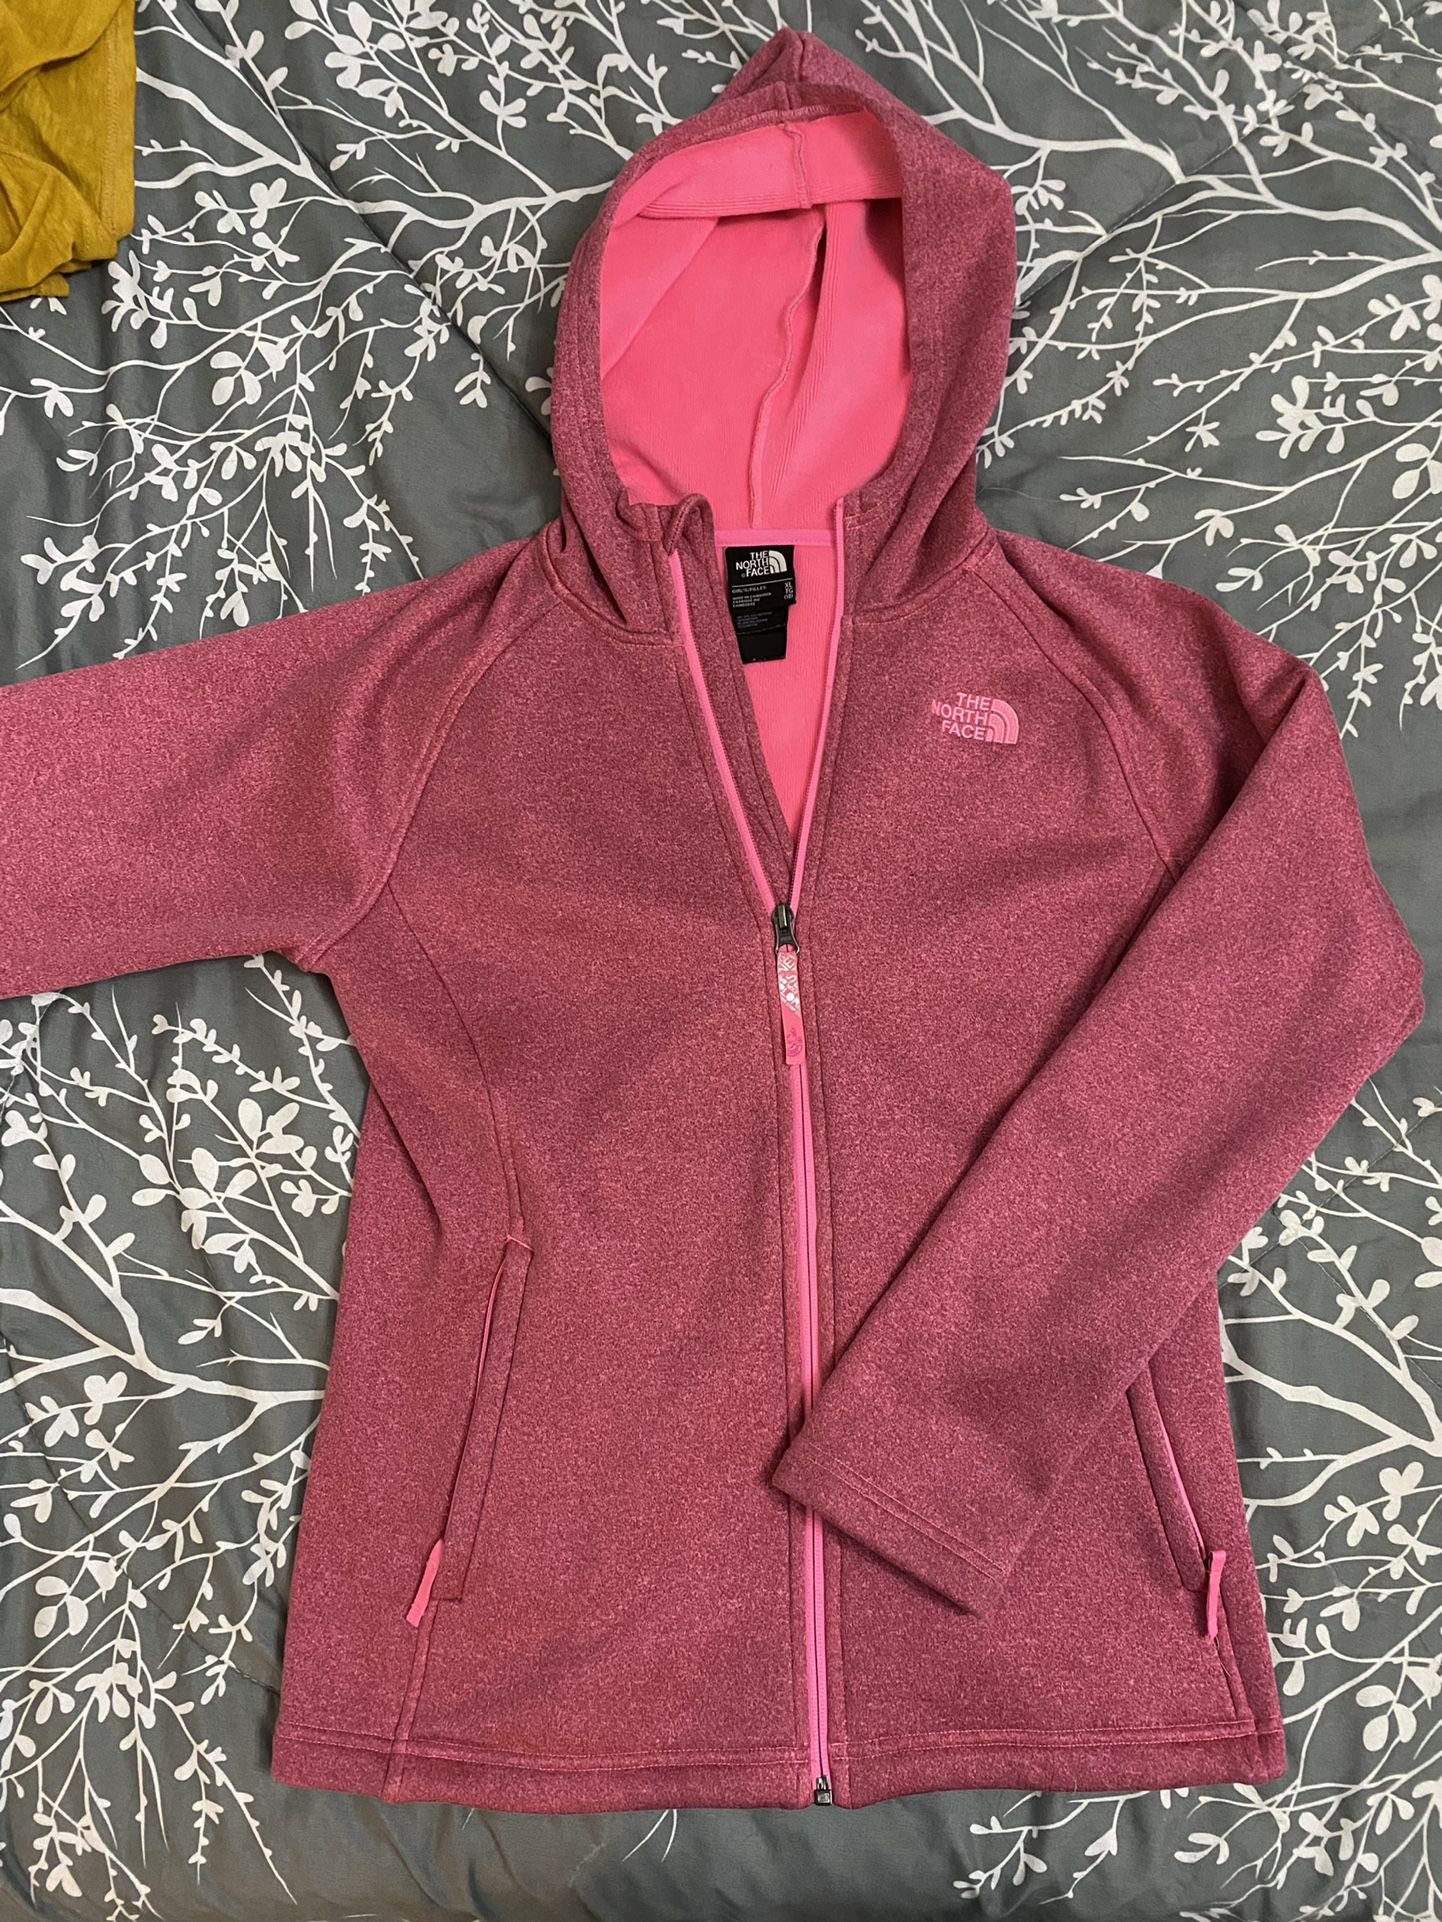 North Face Girl’s XL Zip-Up Pink Hoodie